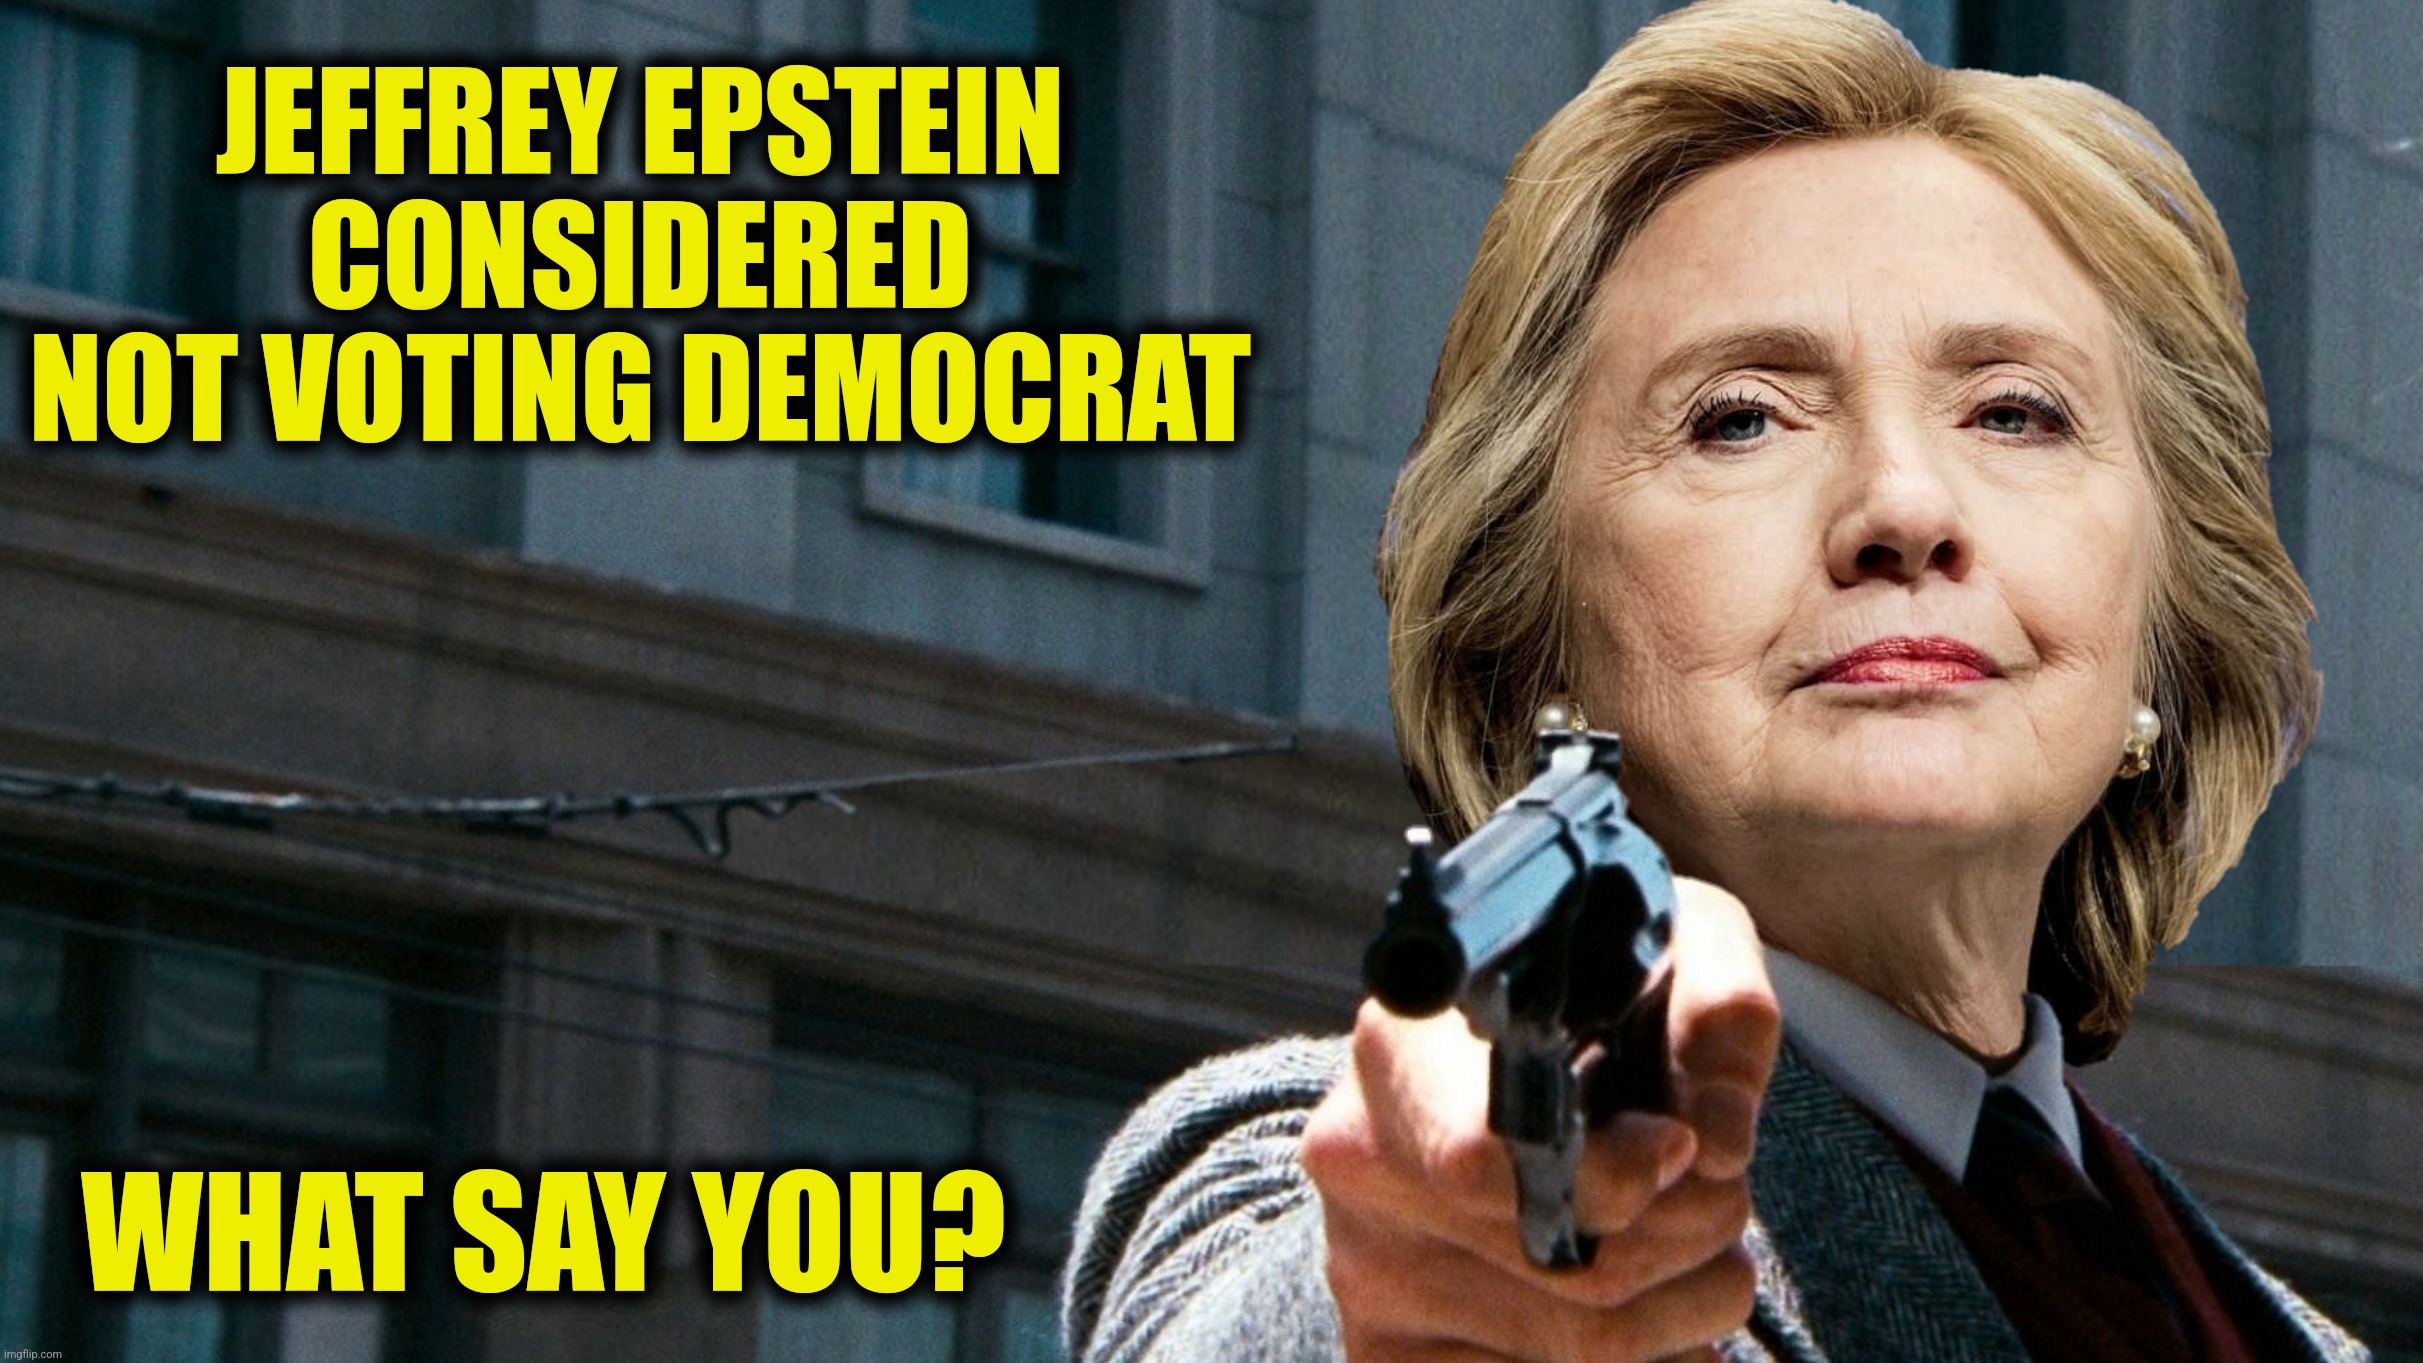 JEFFREY EPSTEIN CONSIDERED NOT VOTING DEMOCRAT WHAT SAY YOU? | made w/ Imgflip meme maker